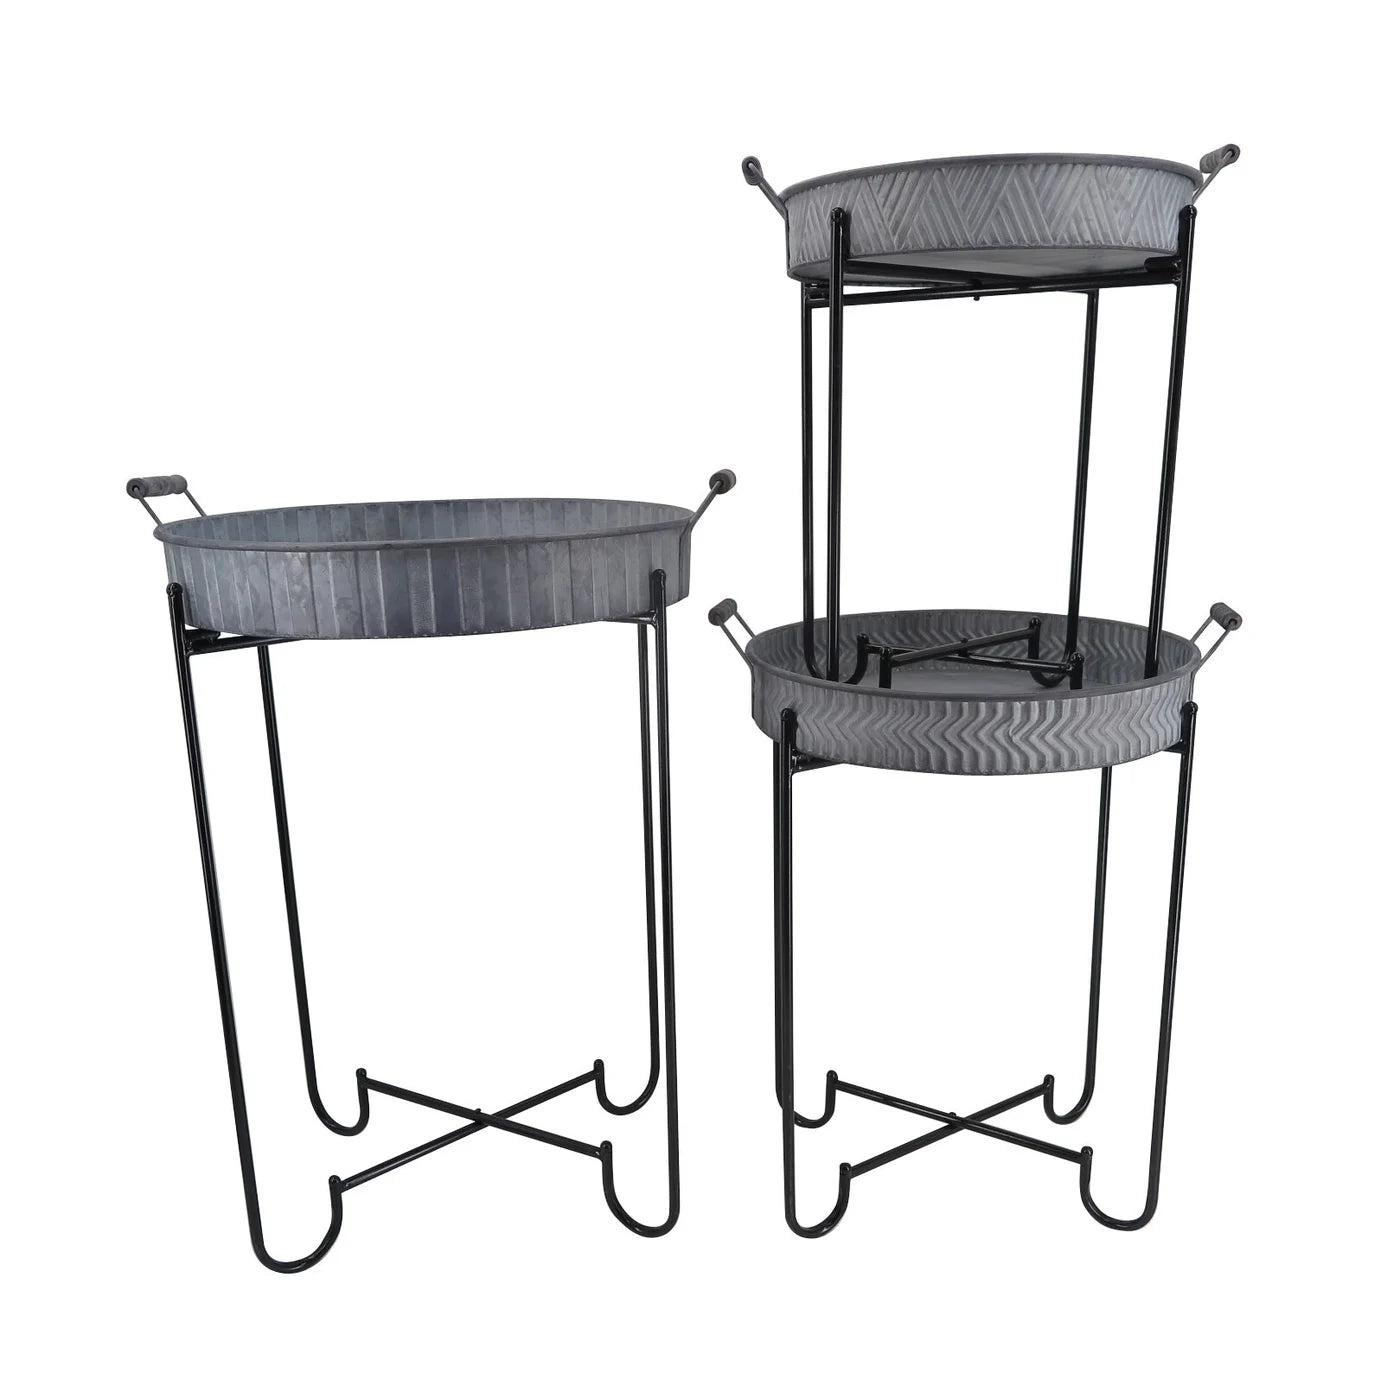 Tray Metal Plant Stand